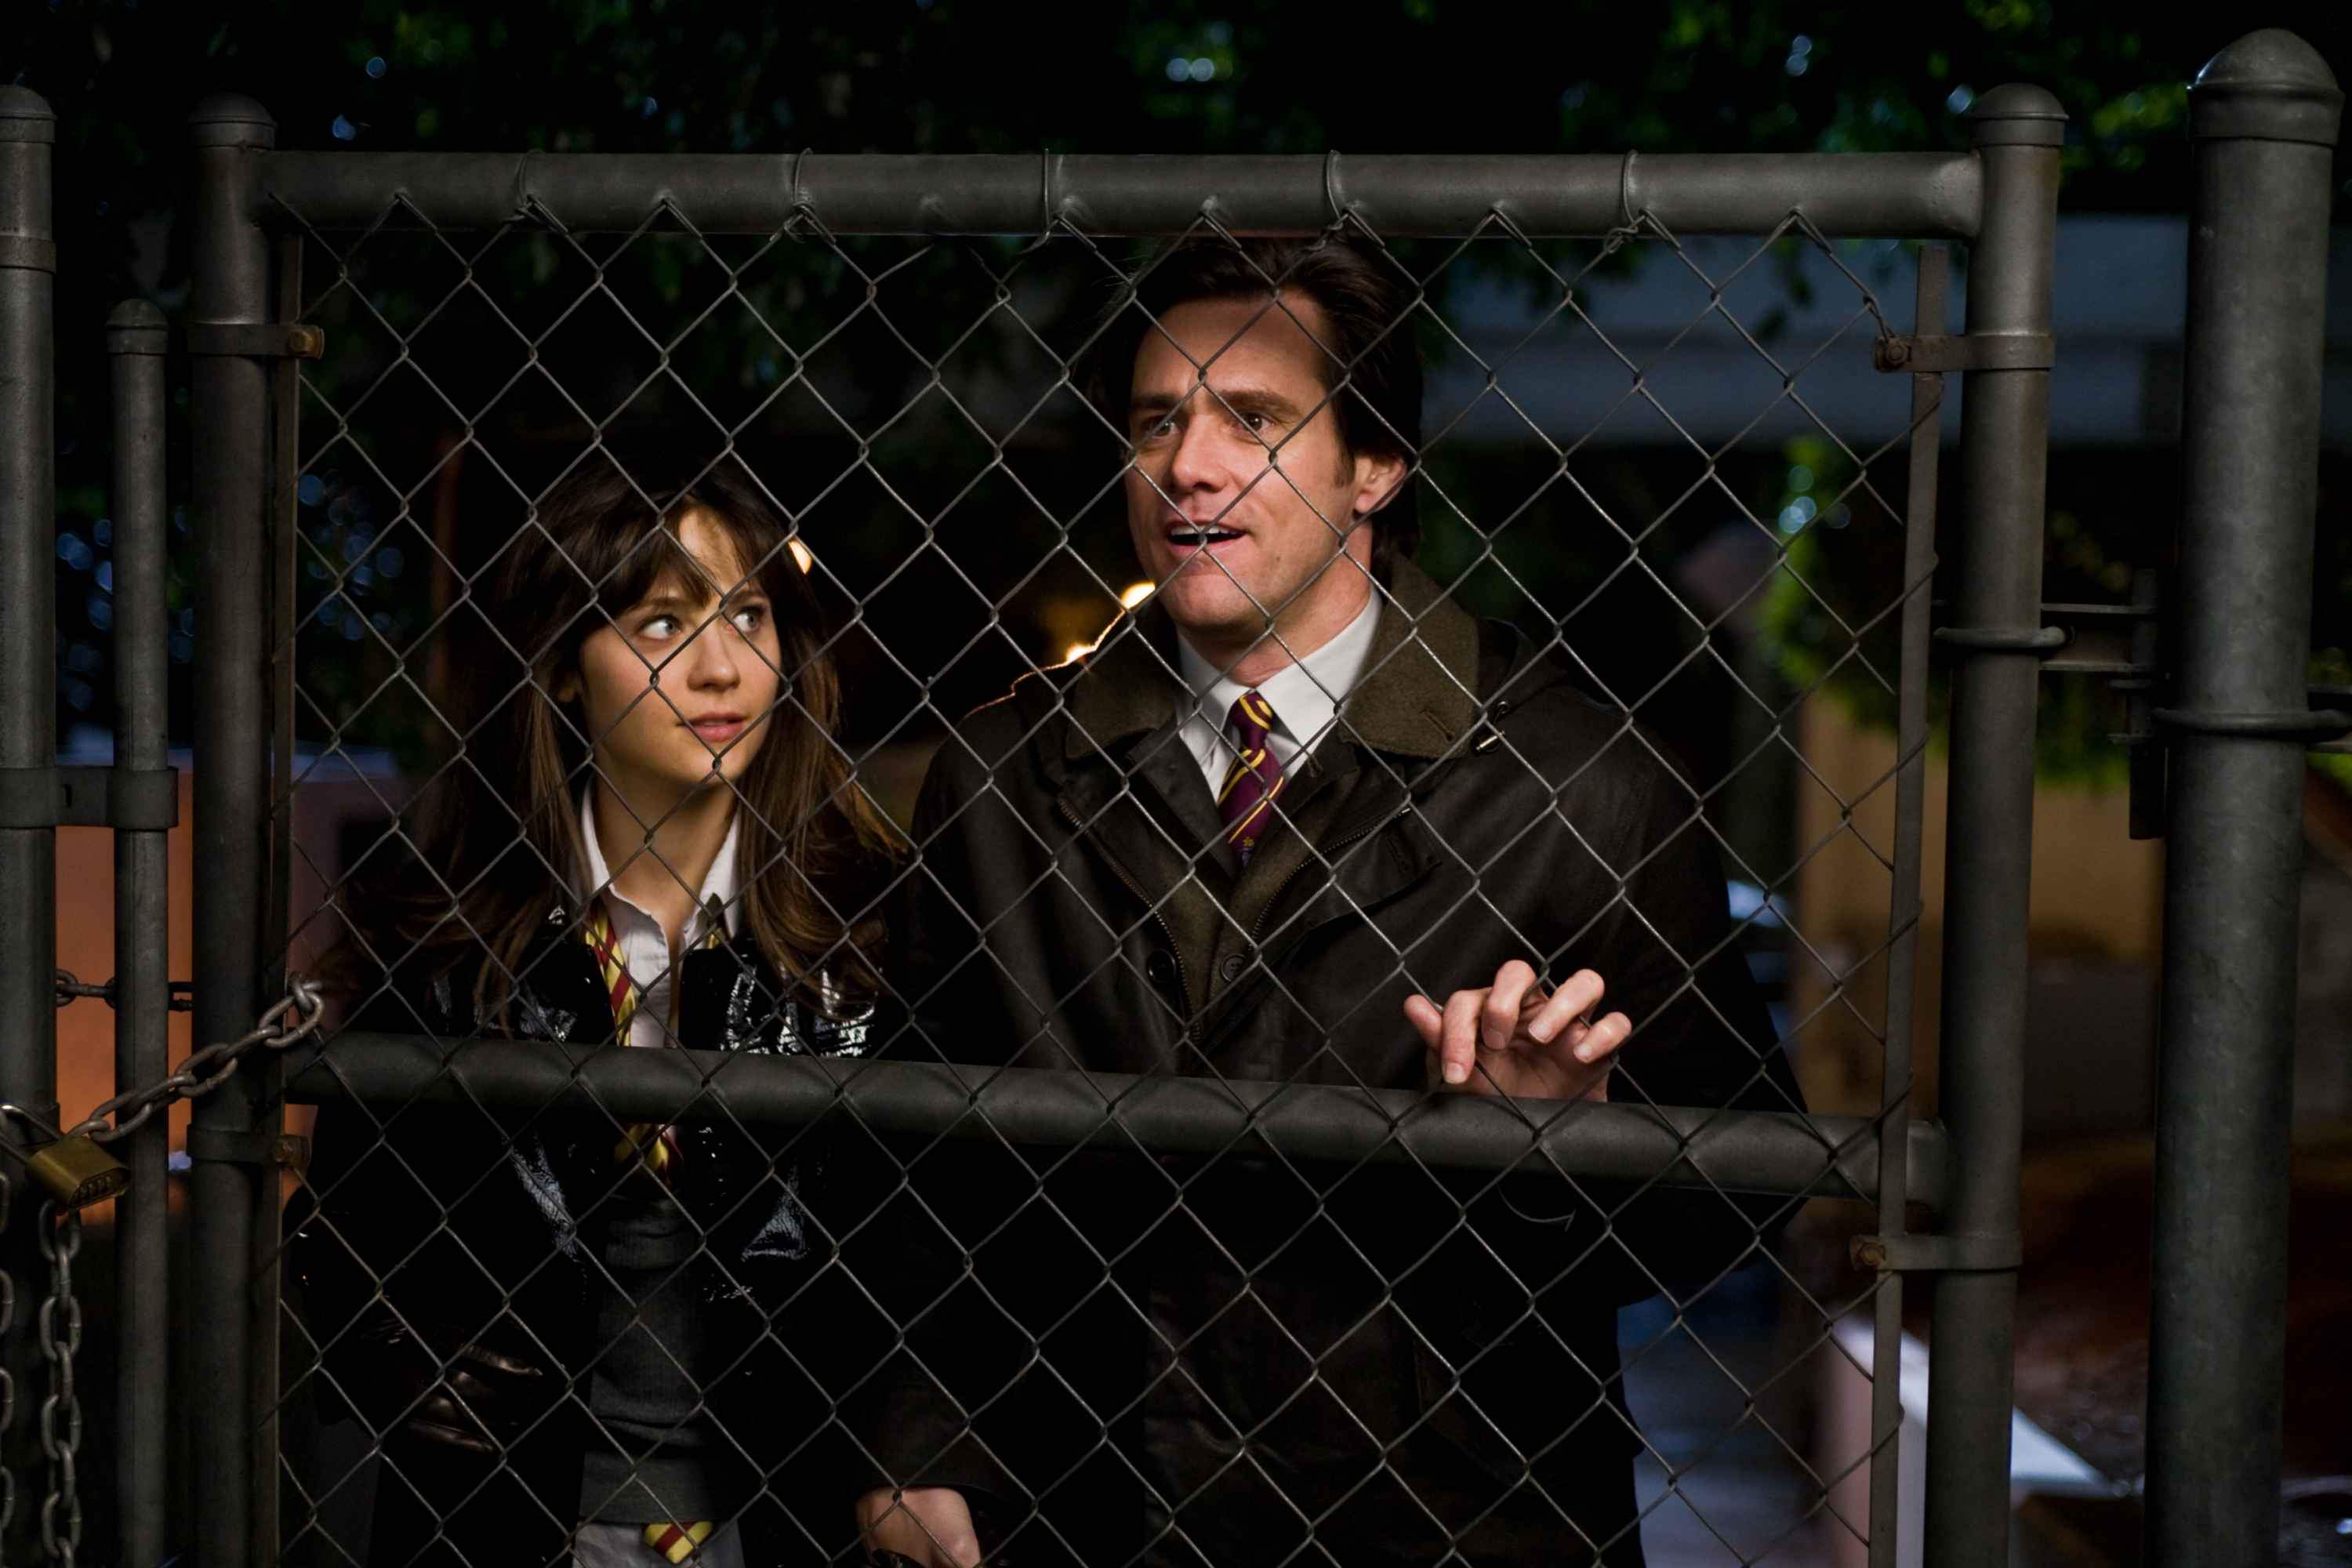 Zooey Deschanel stars as Renee Allison and Jim Carrey stars as Carl Allen in Warner Bros. Pictures' Yes Man (2008). Photo by Melissa Moseley.